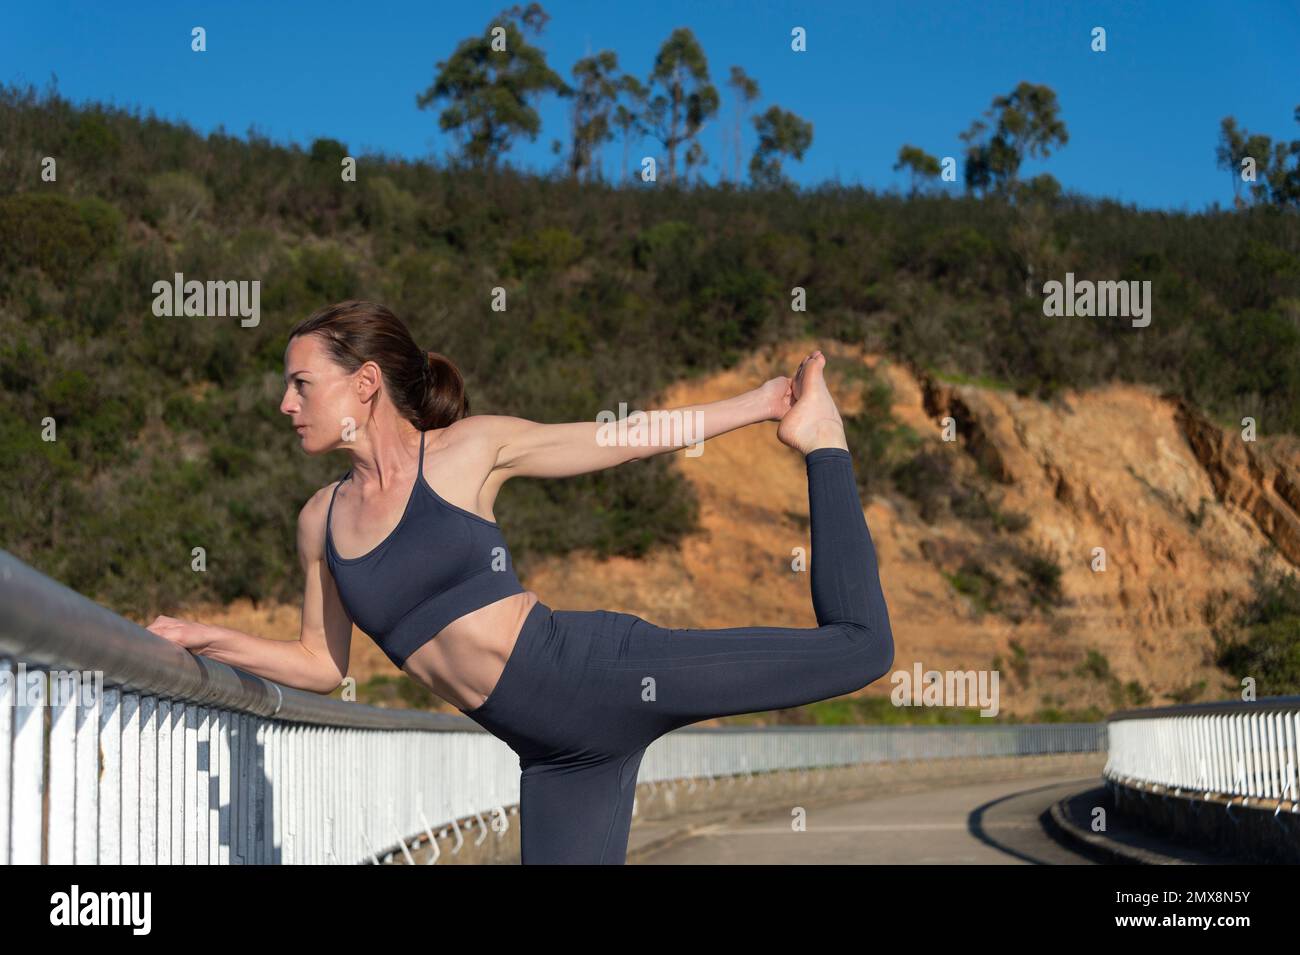 Woman practicing yoga and stretching outside, dancer pose. Stock Photo